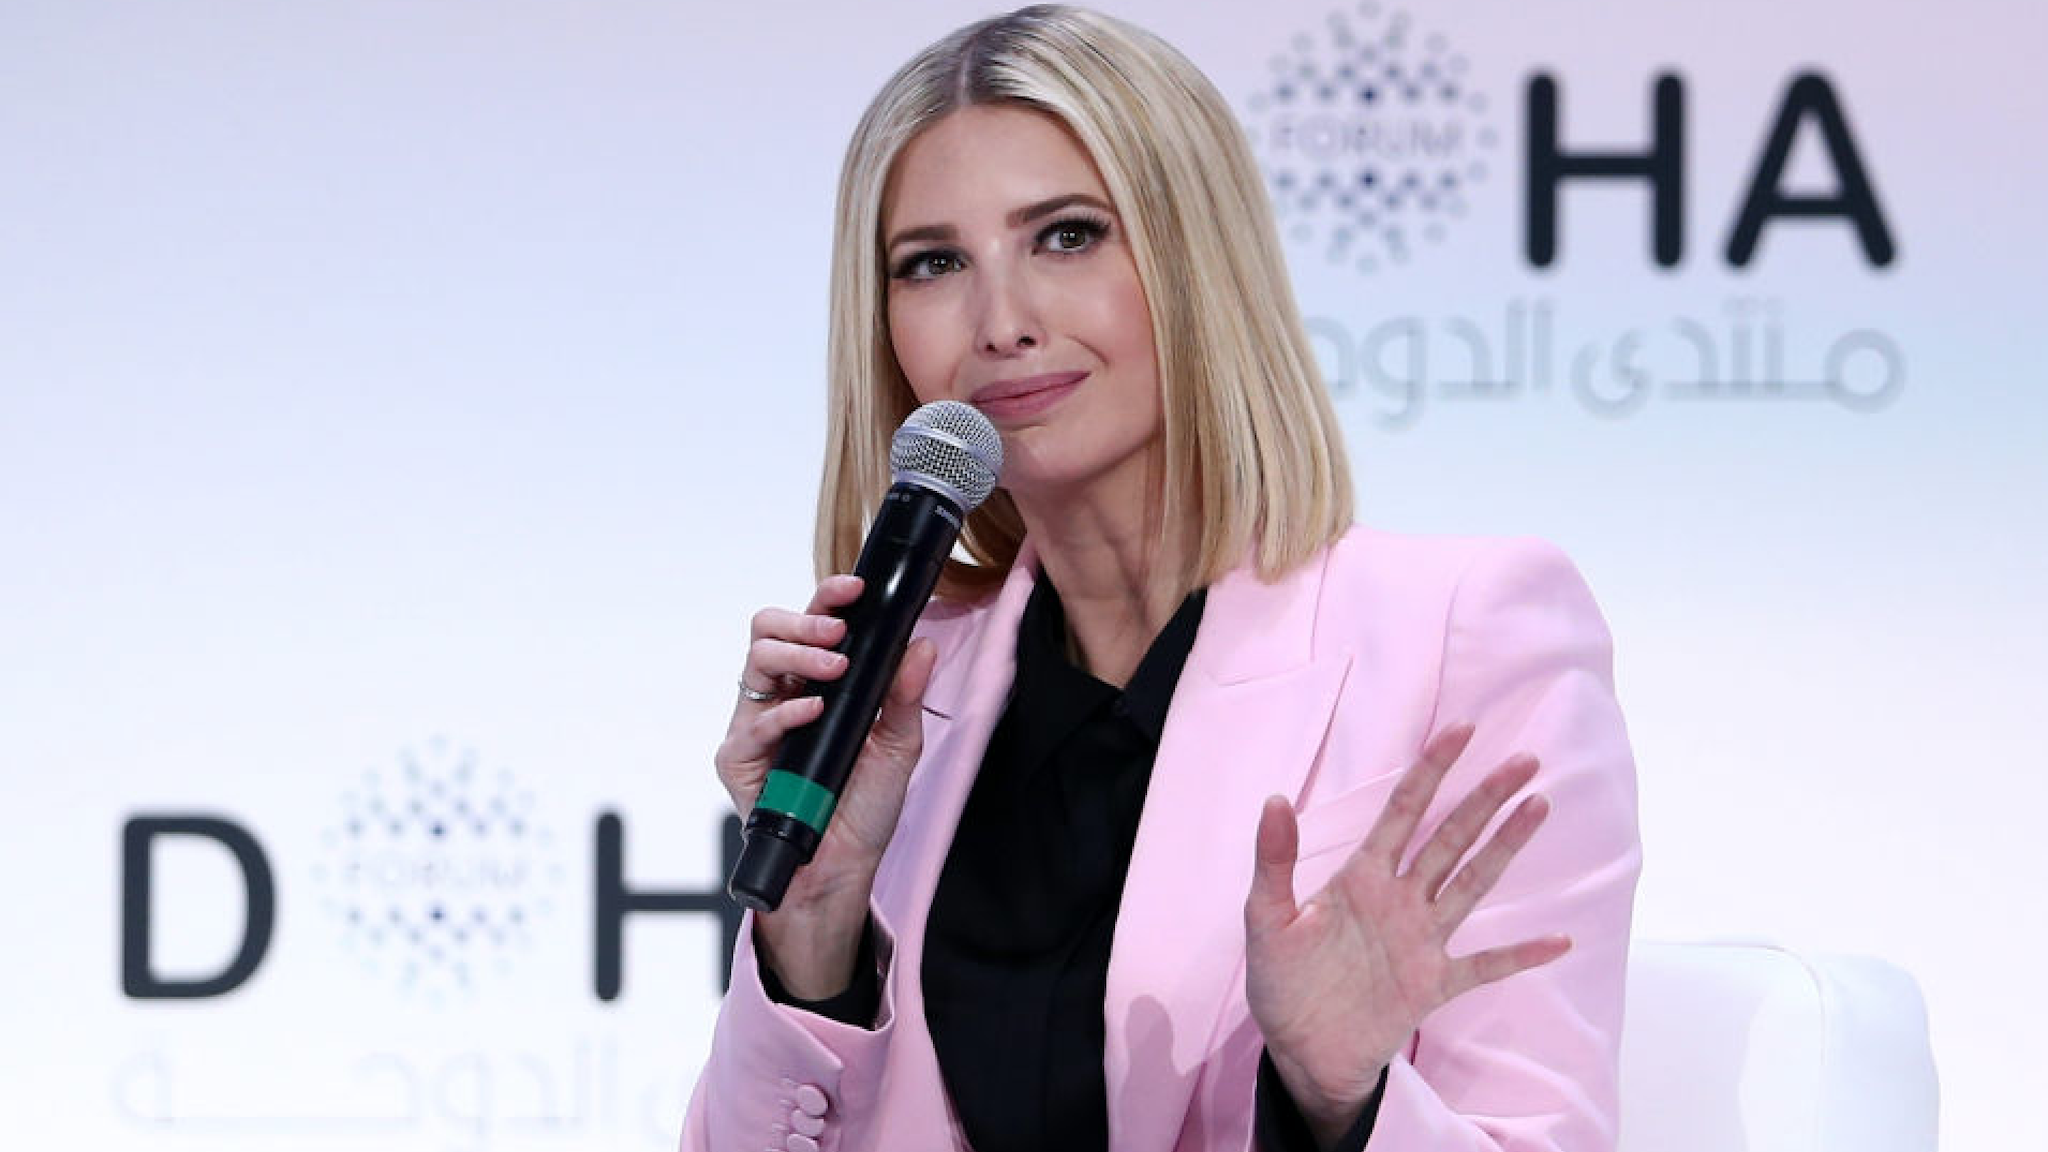 Ivanka Trump, senior advisor to the president of the United States and daughter of President Donald Trump, speaks during a plenary session of the Doha Forum in the Qatari capital on December 14, 2019.